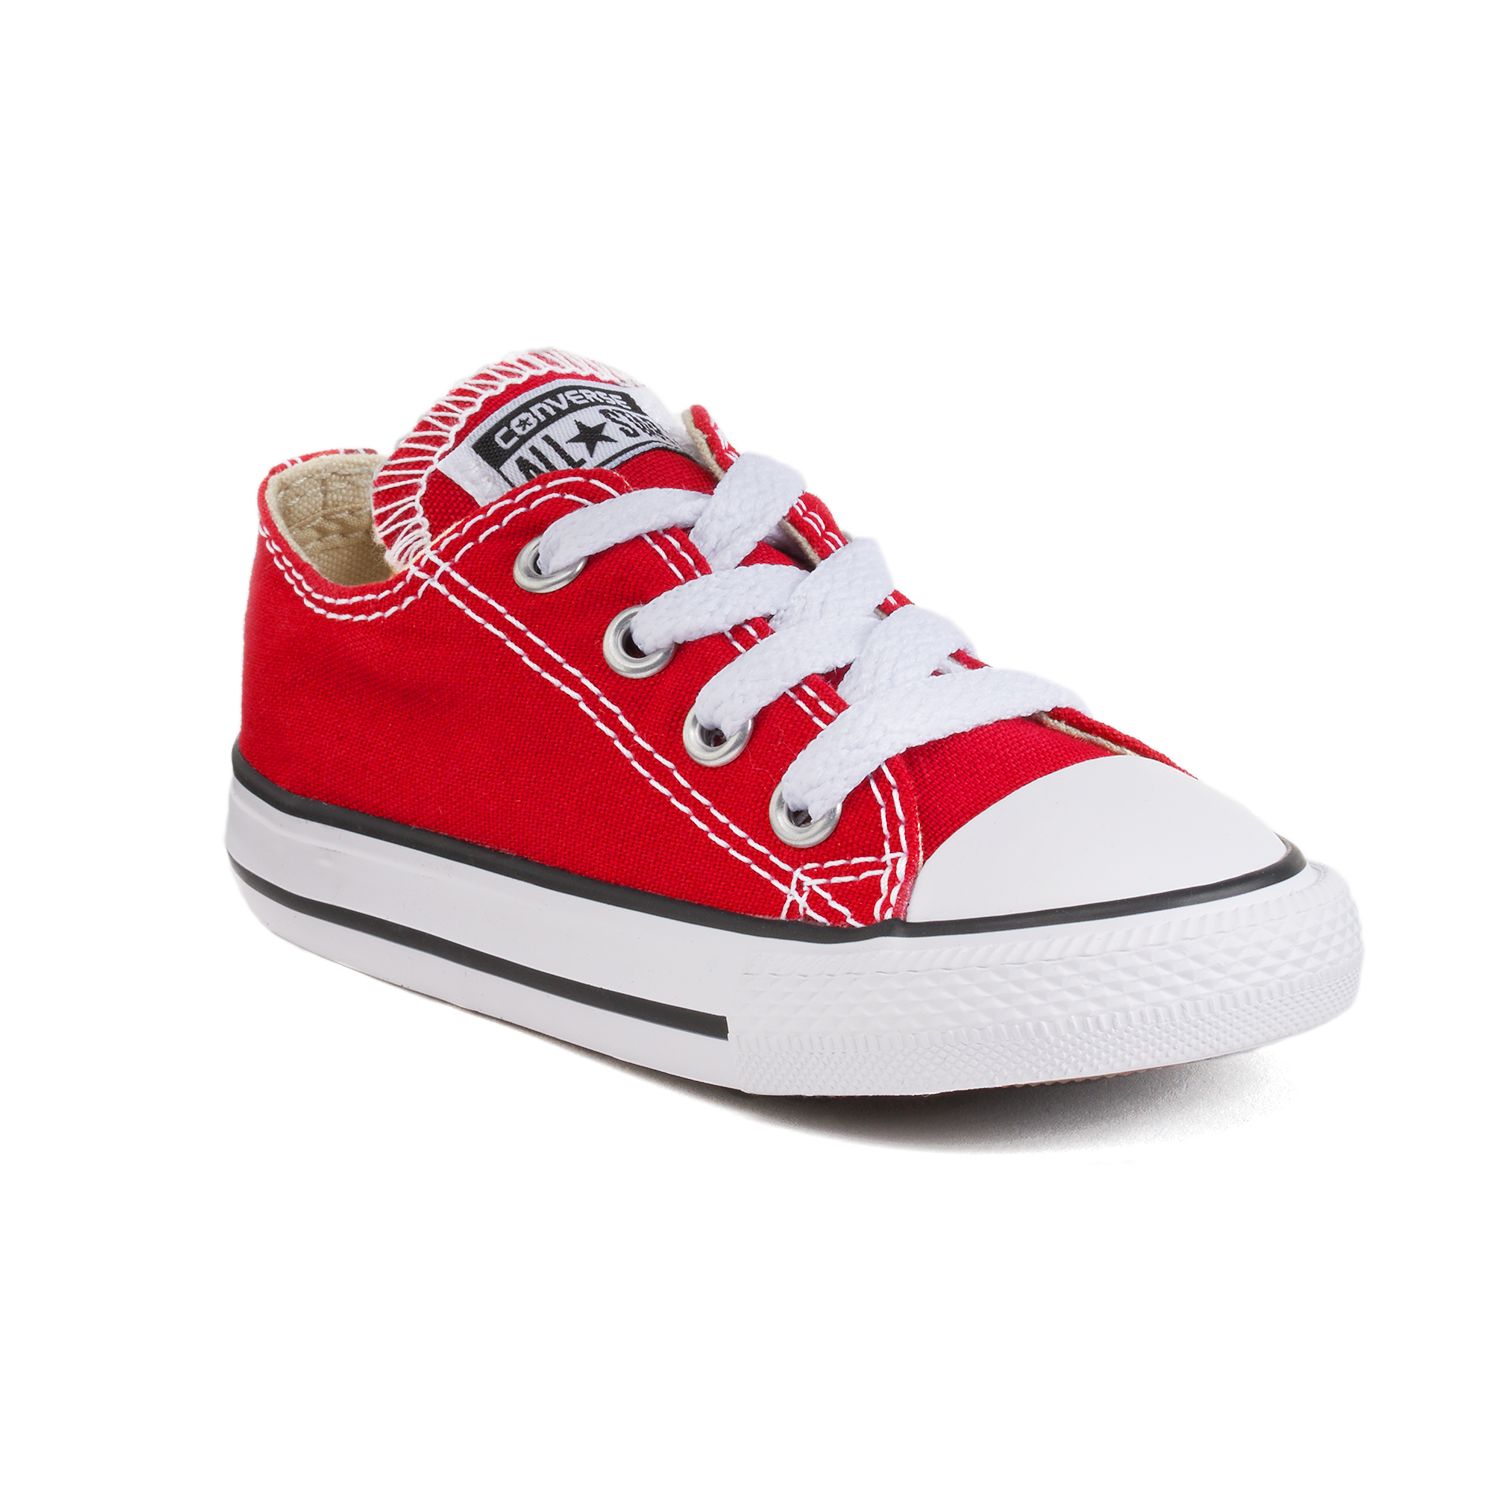 red converse high tops